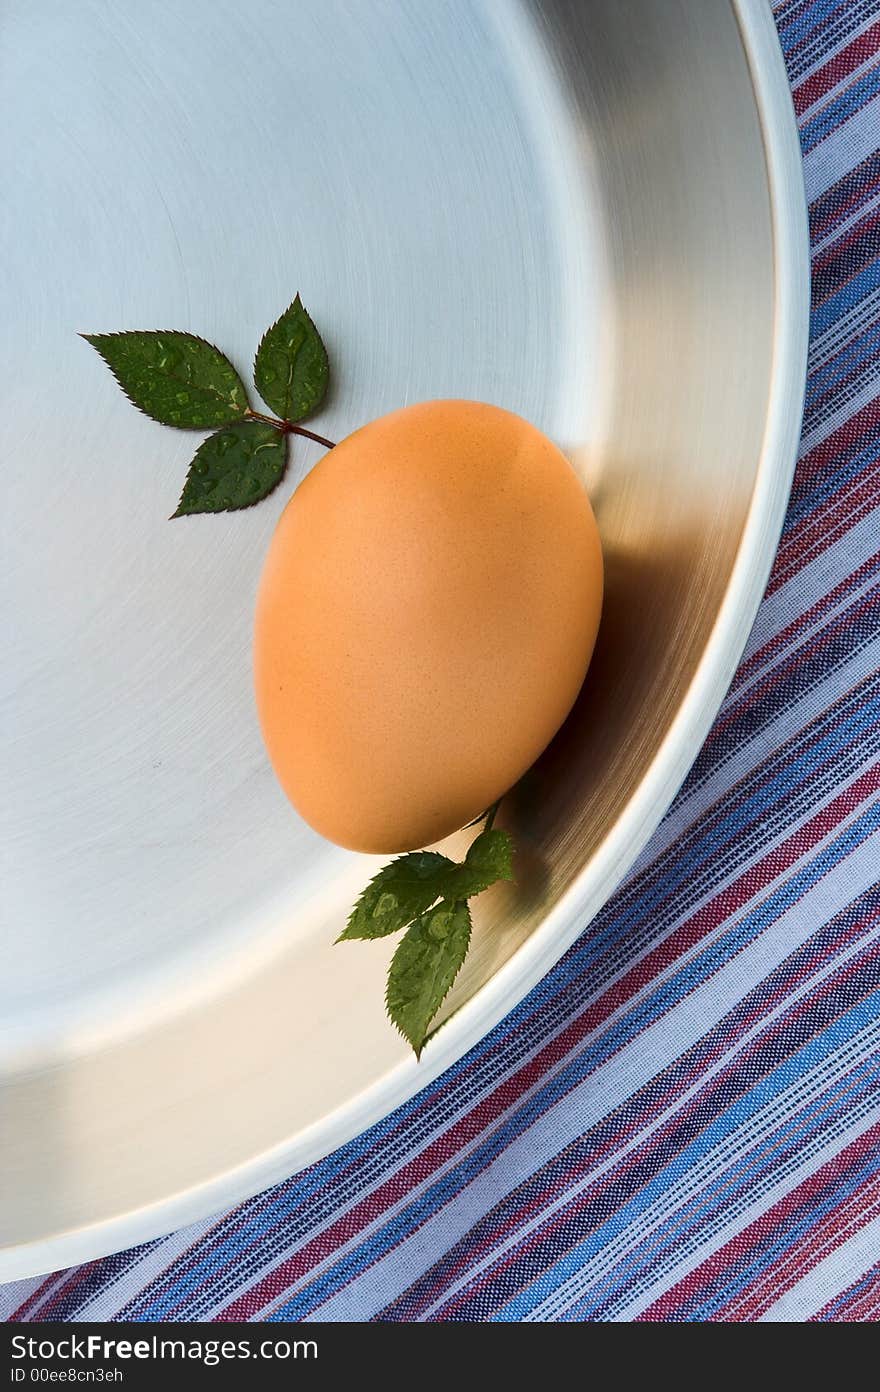 Chicken's egg in the shell in a silver frying pan. The image is shot from above. The pan is on a striped red, blue and white tablecloth. There are miniature rose leaves placed next to the egg. Chicken's egg in the shell in a silver frying pan. The image is shot from above. The pan is on a striped red, blue and white tablecloth. There are miniature rose leaves placed next to the egg